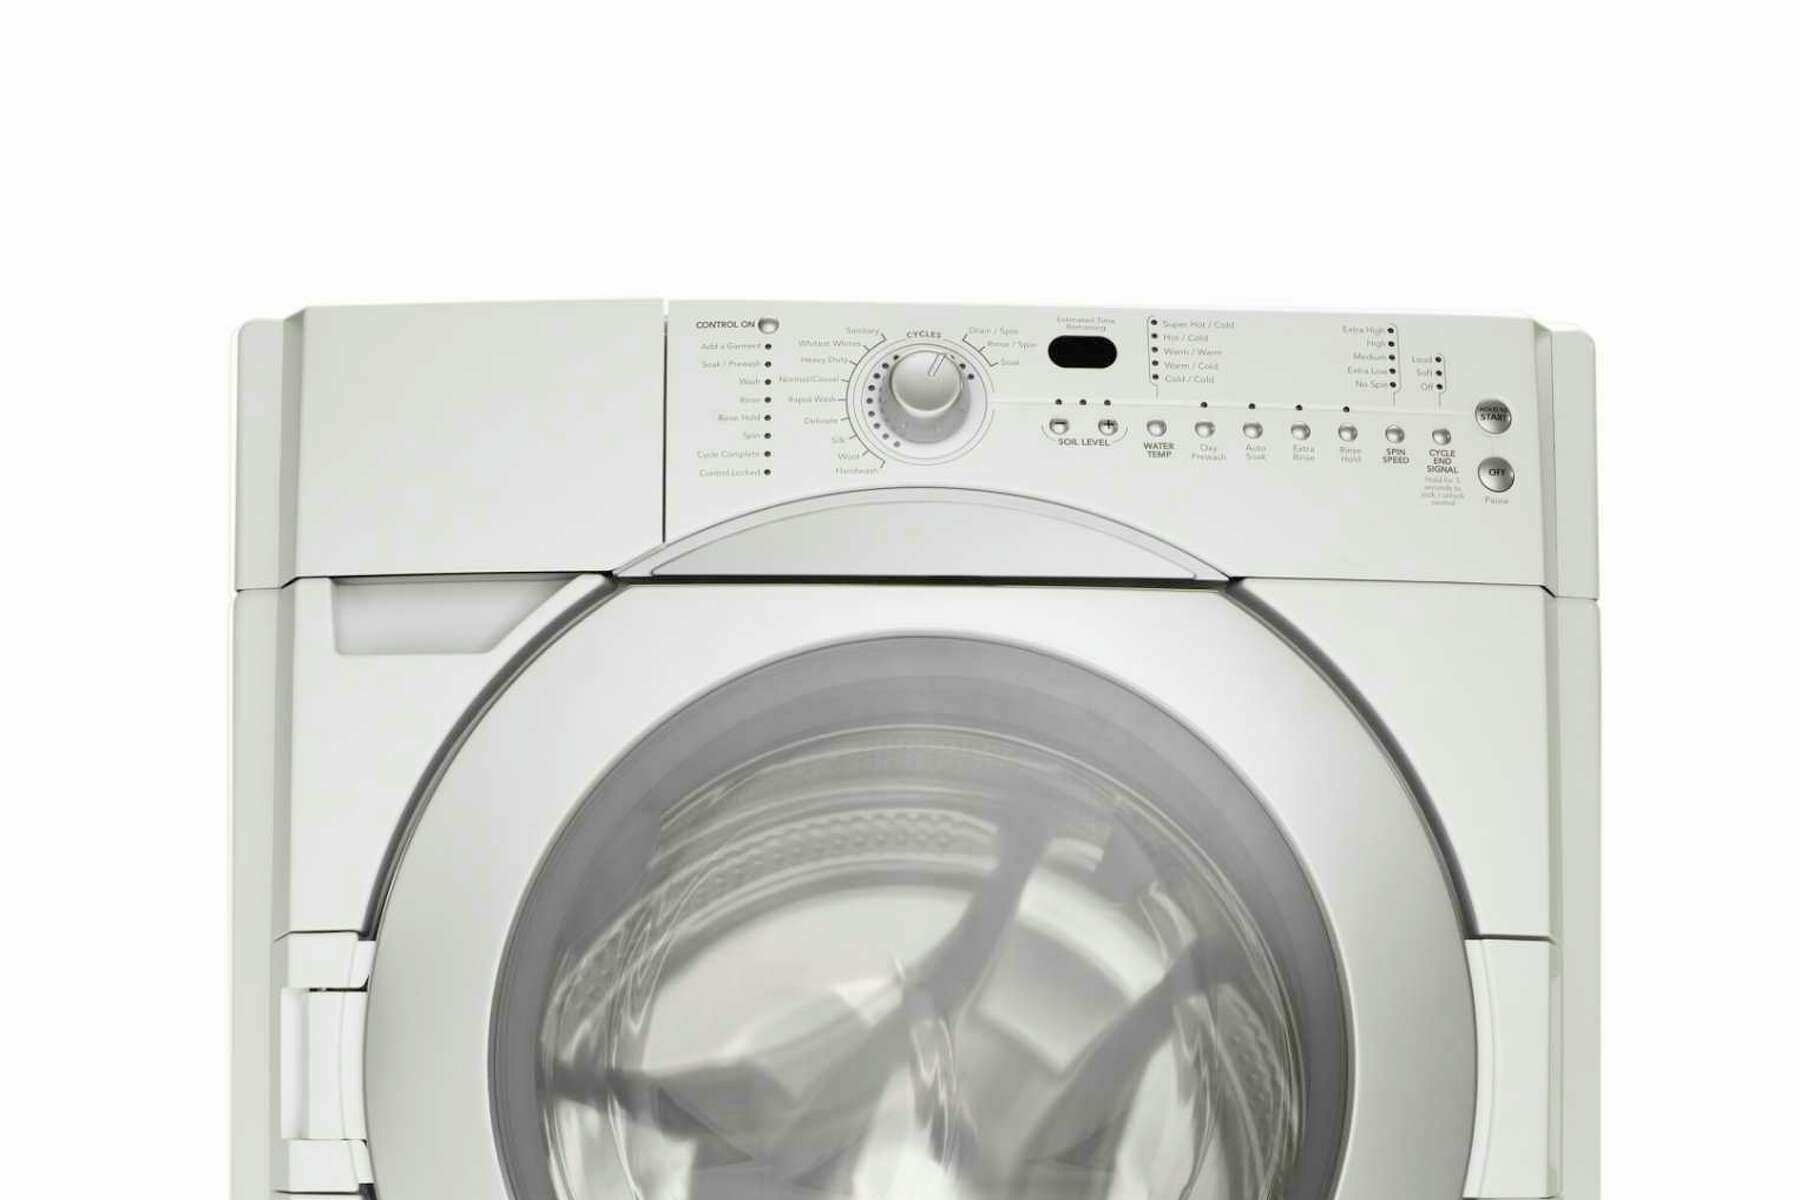 How To Fix The Error Code F26 For Whirlpool Washer